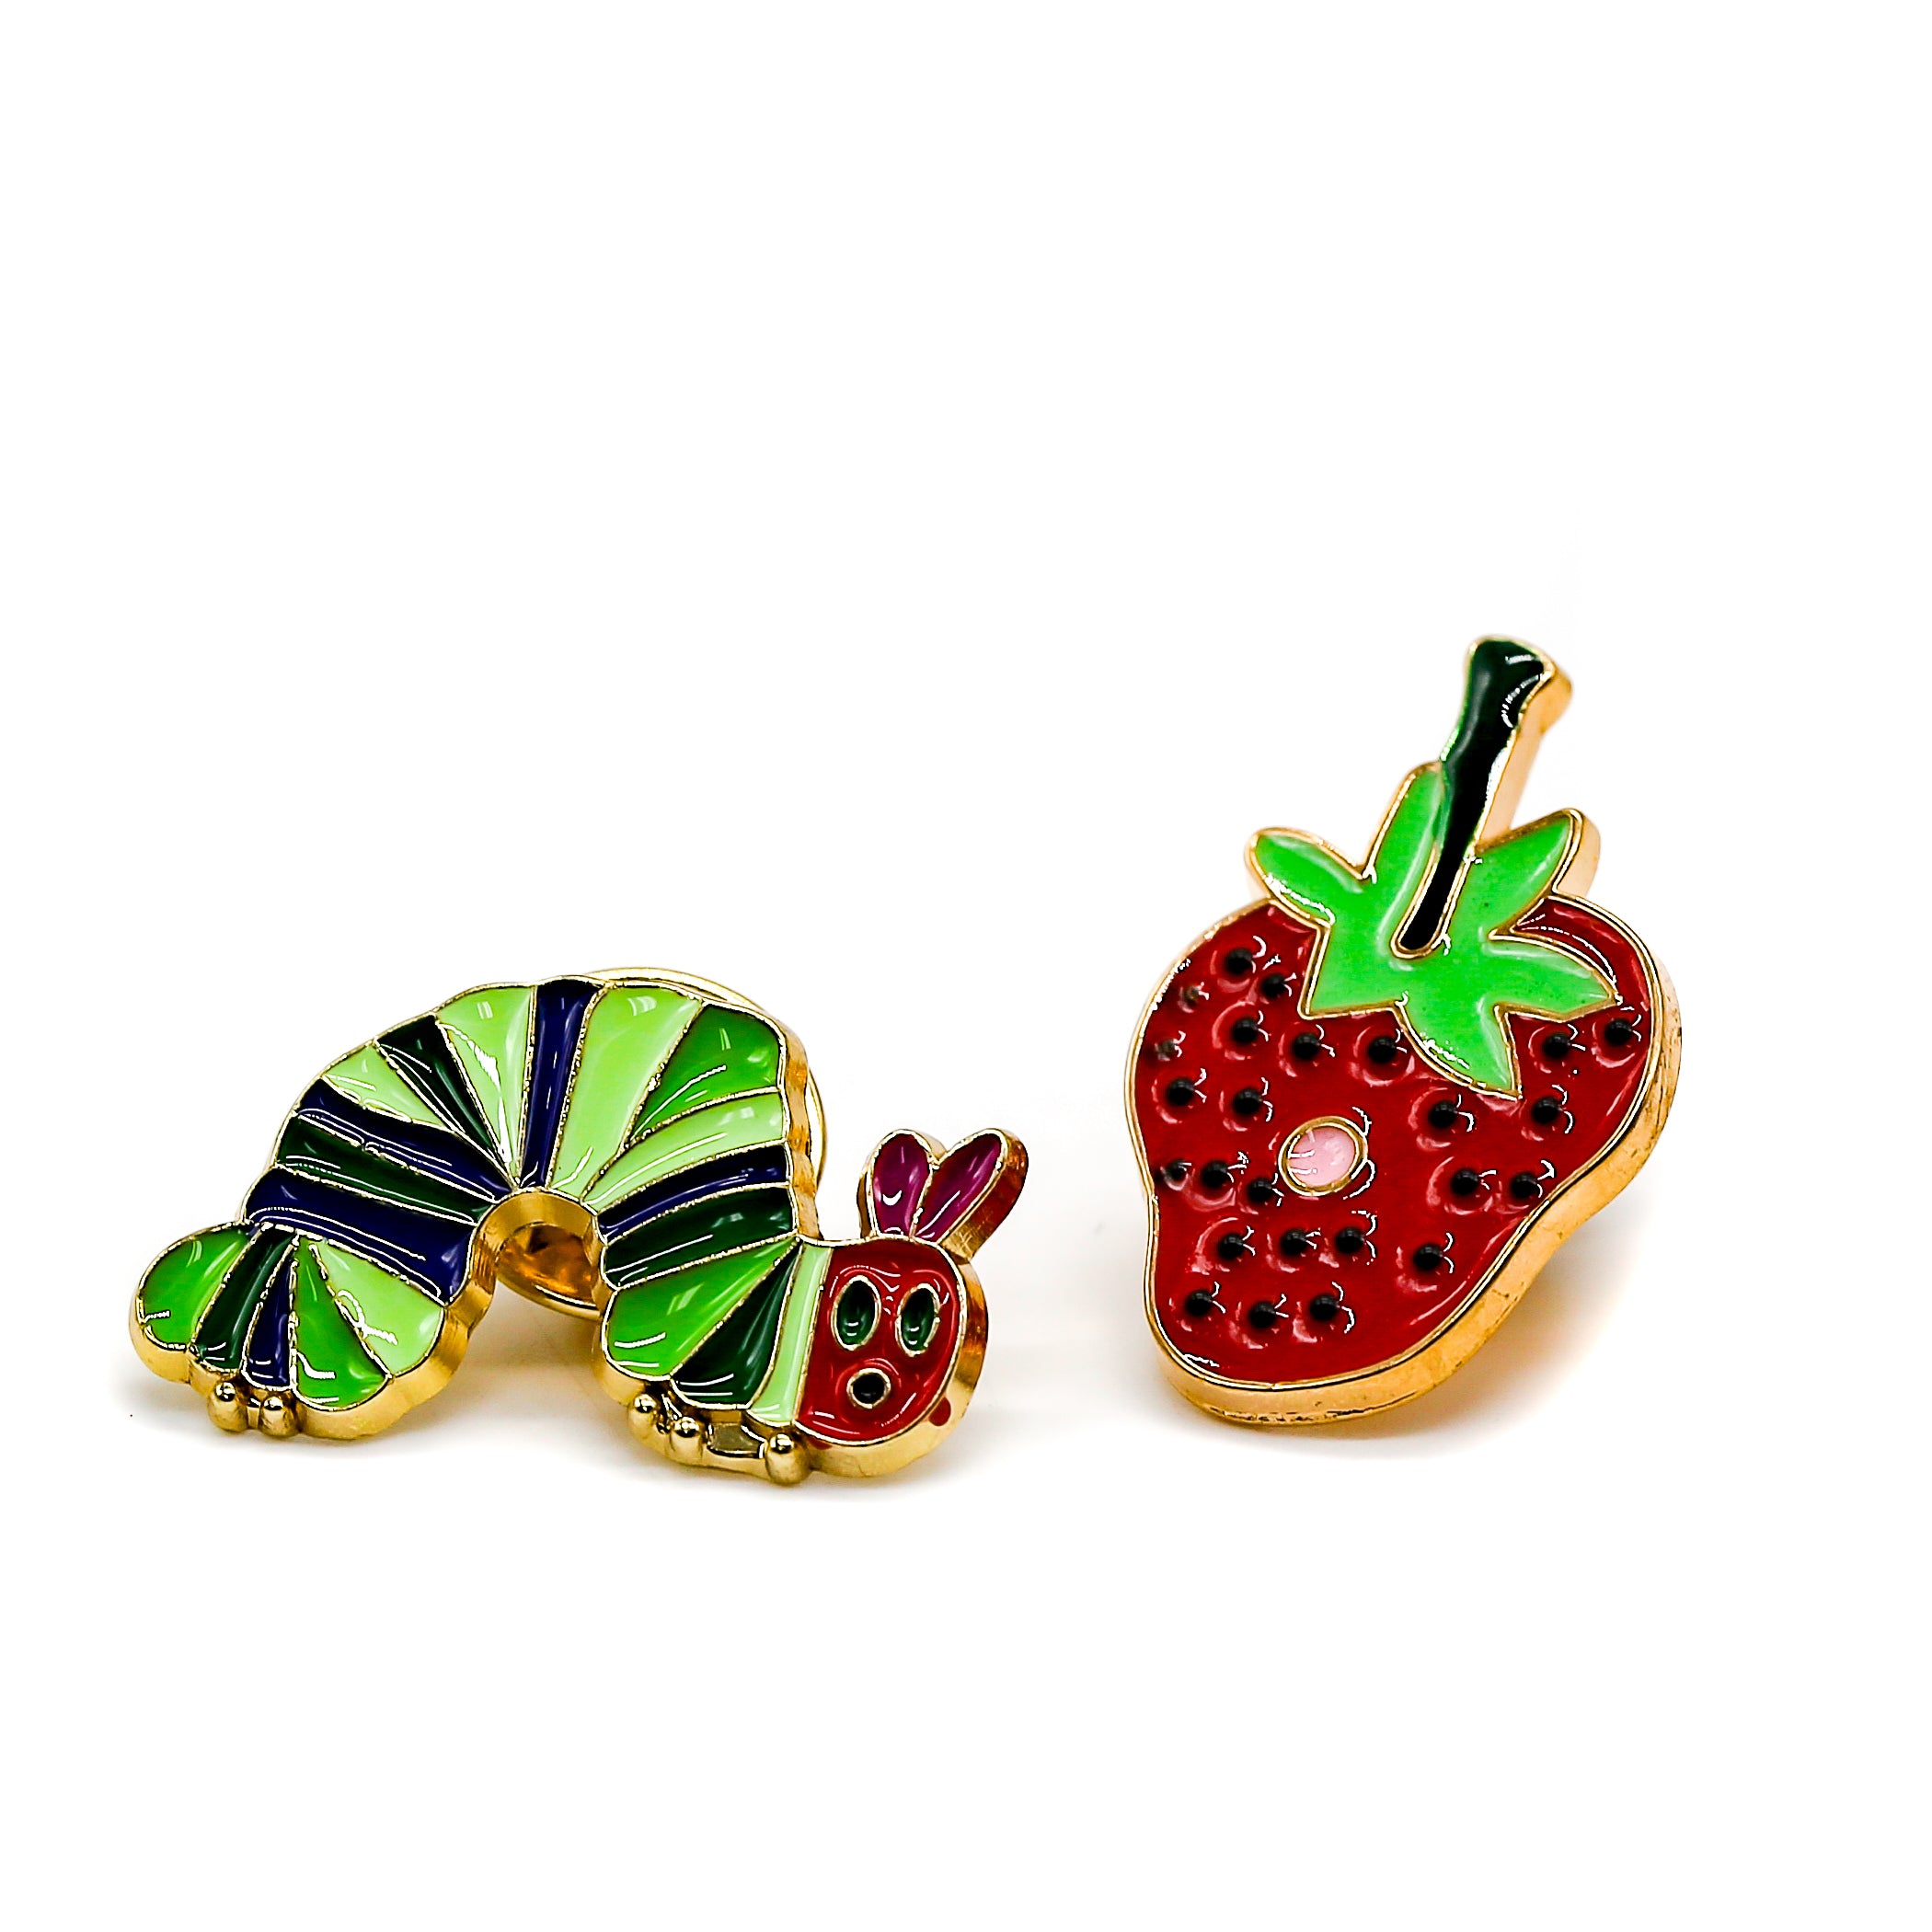 GoG Hungry Caterpillar Pin Set - Mortise And Tenon